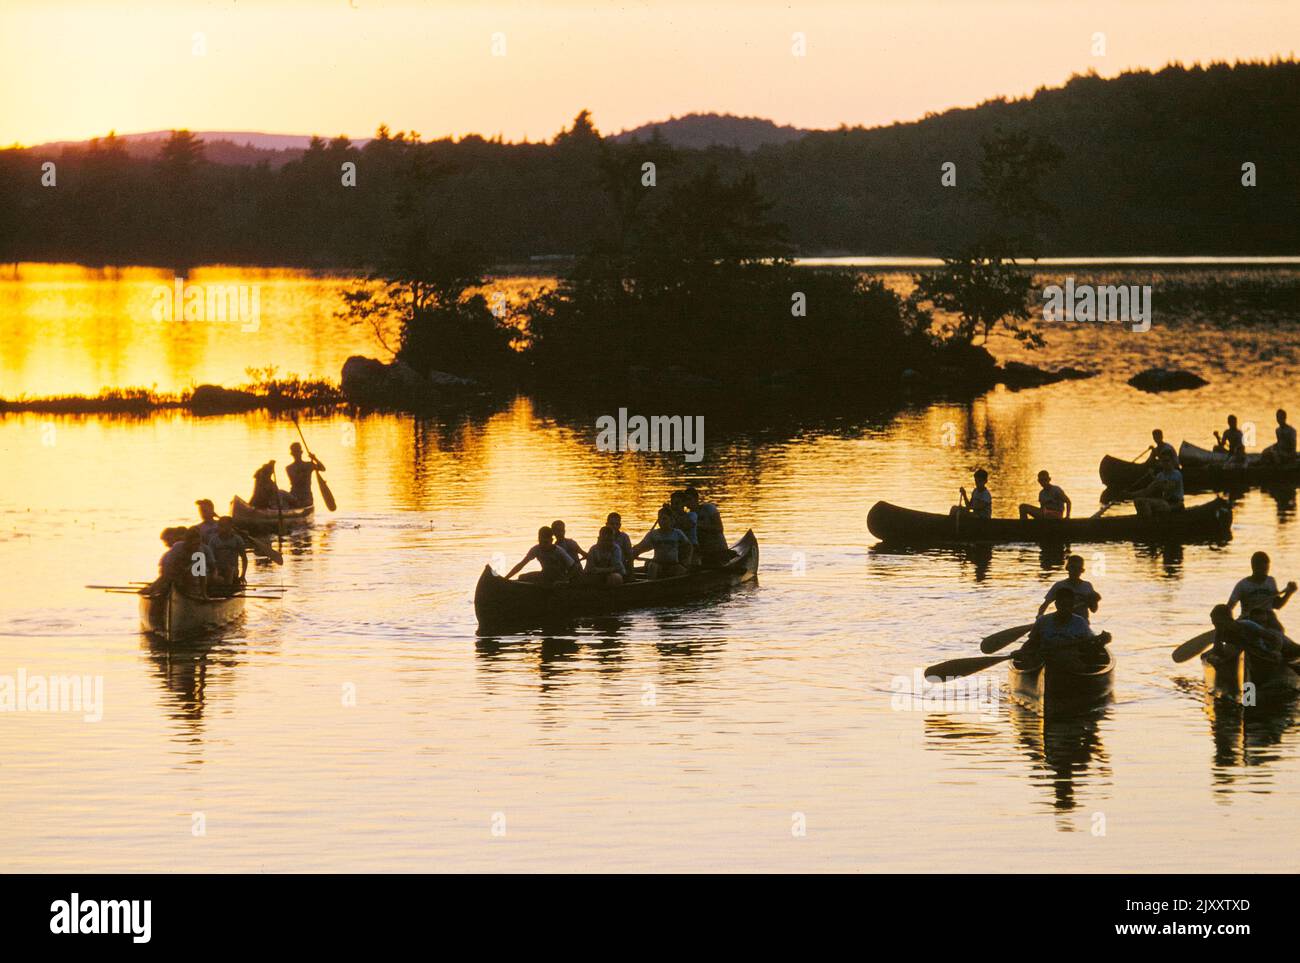 Silhouette of boys in Canoe Boats at Sunset, Camp Sunapee, New Hampshire, USA, Stock Photo